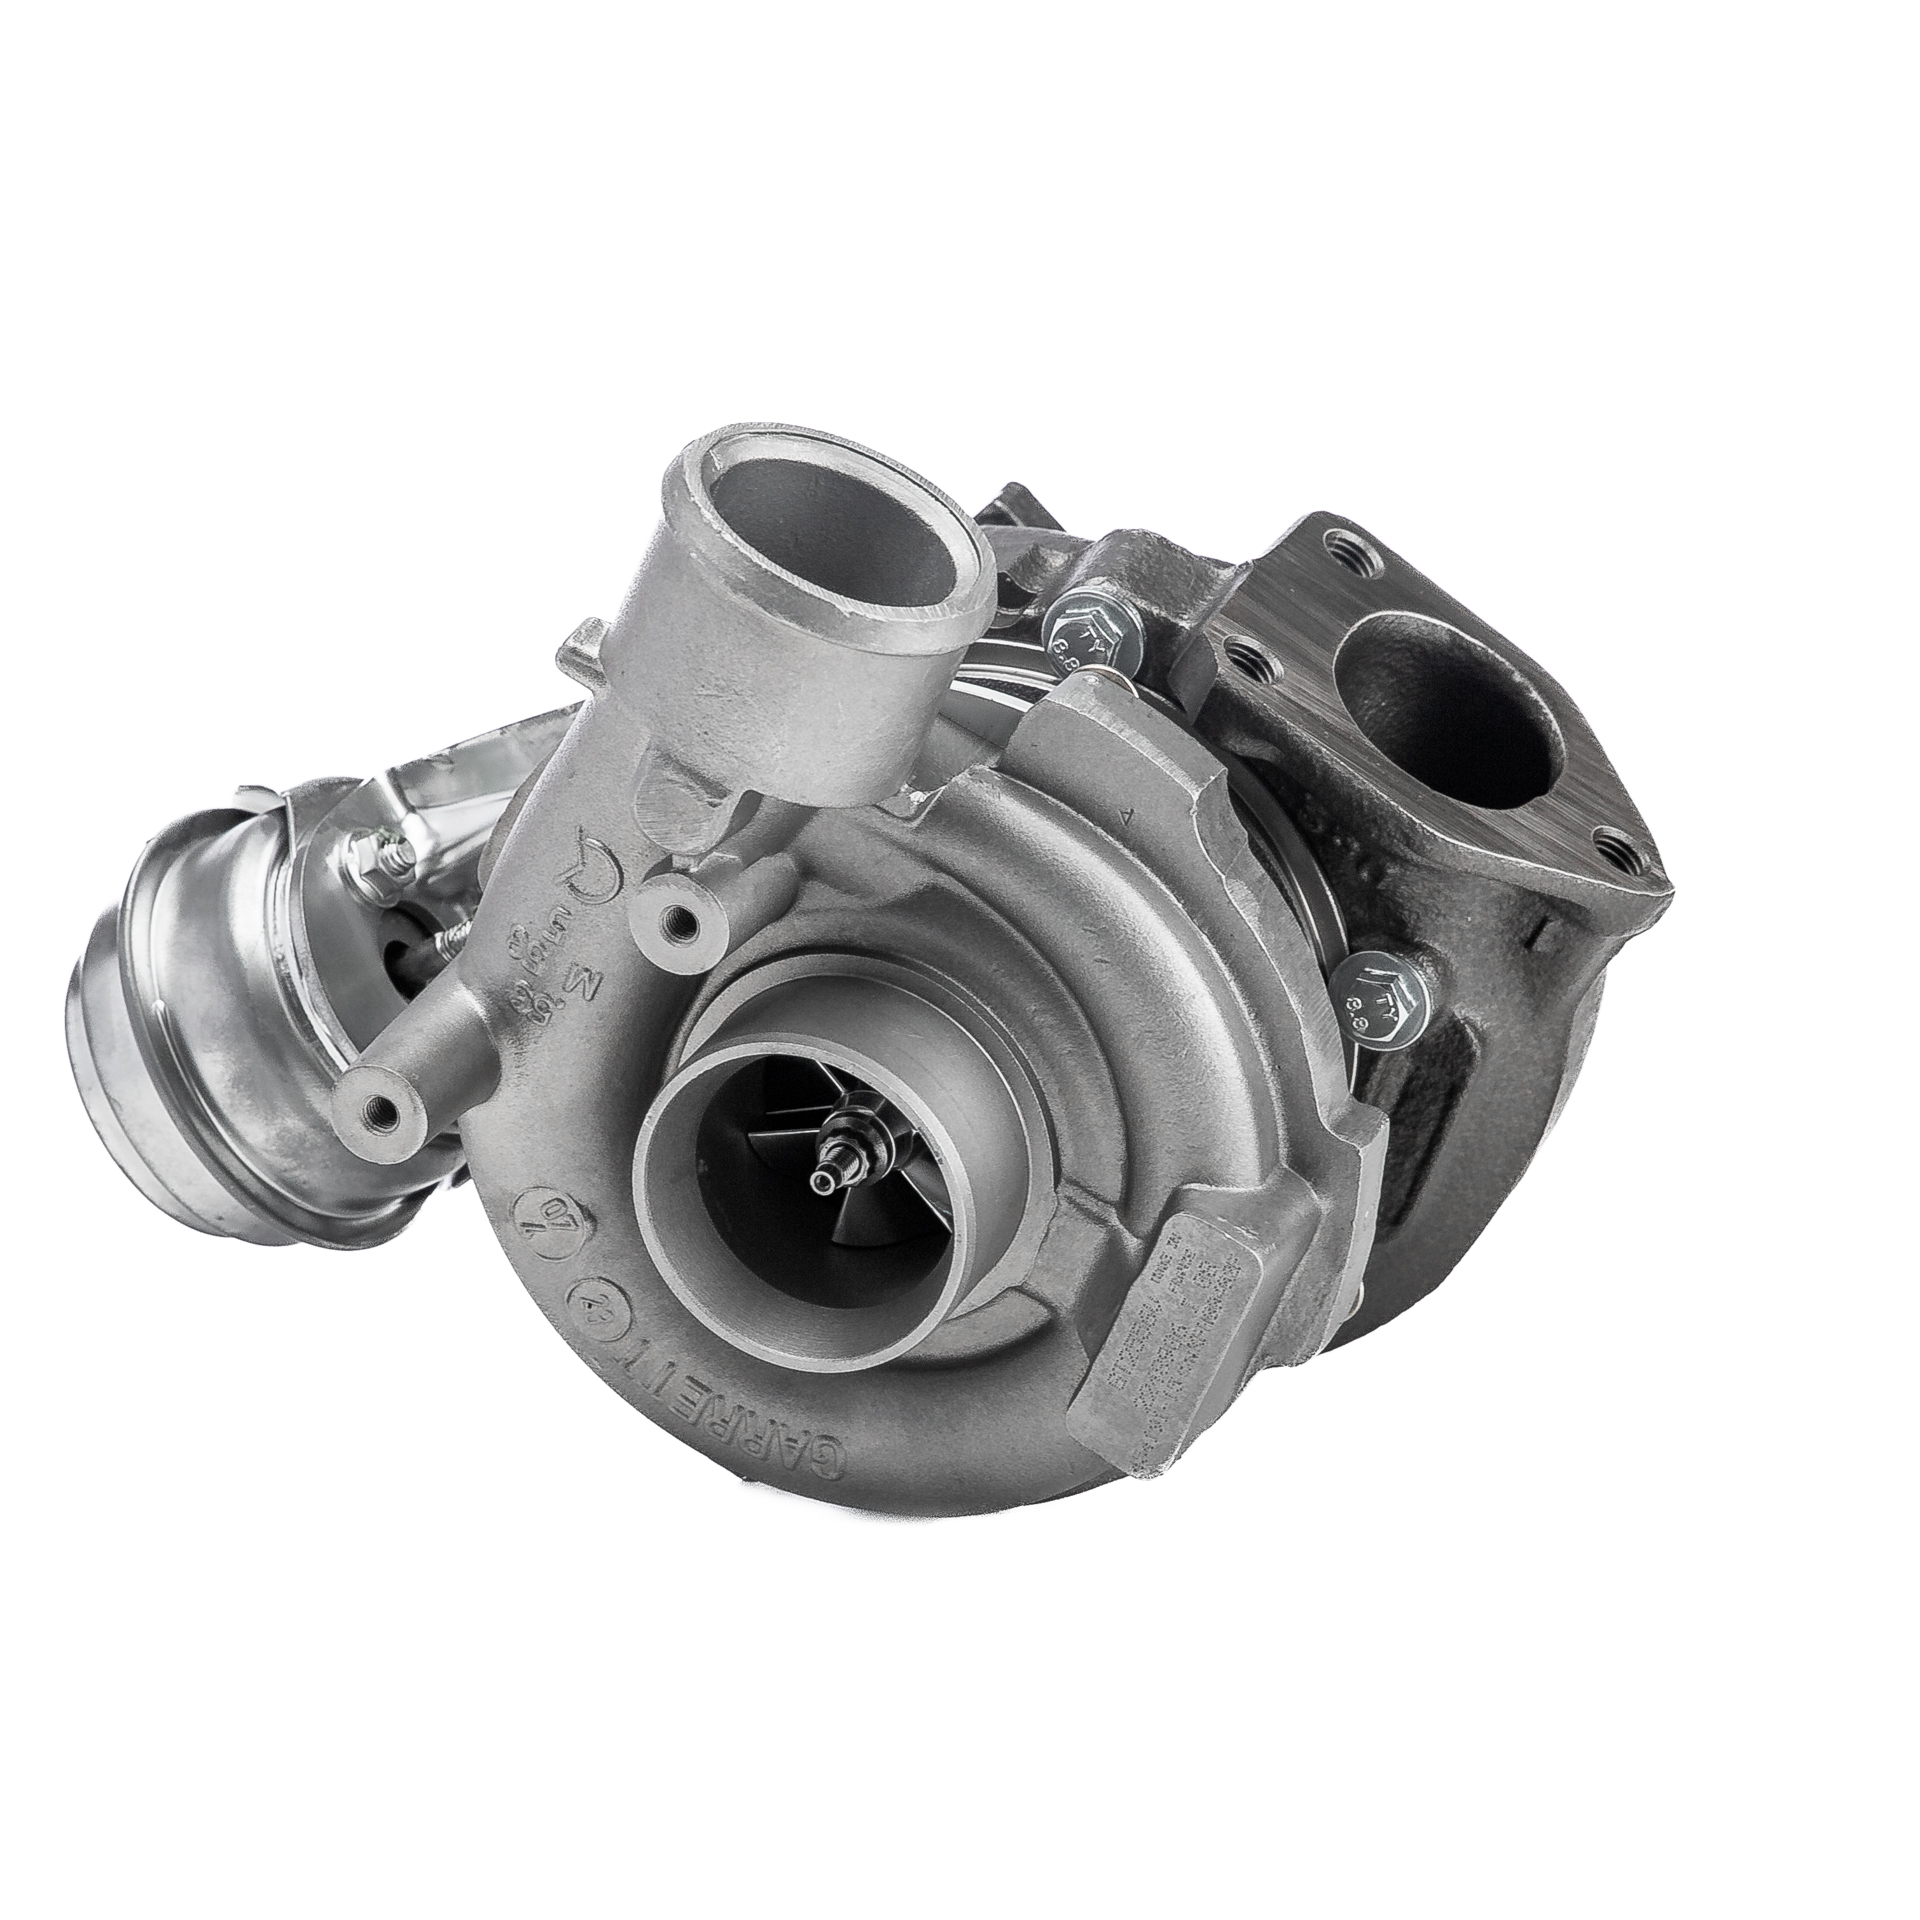 BR Turbo Turbocharger BMW 5 Series E39 new 454191-5001RS